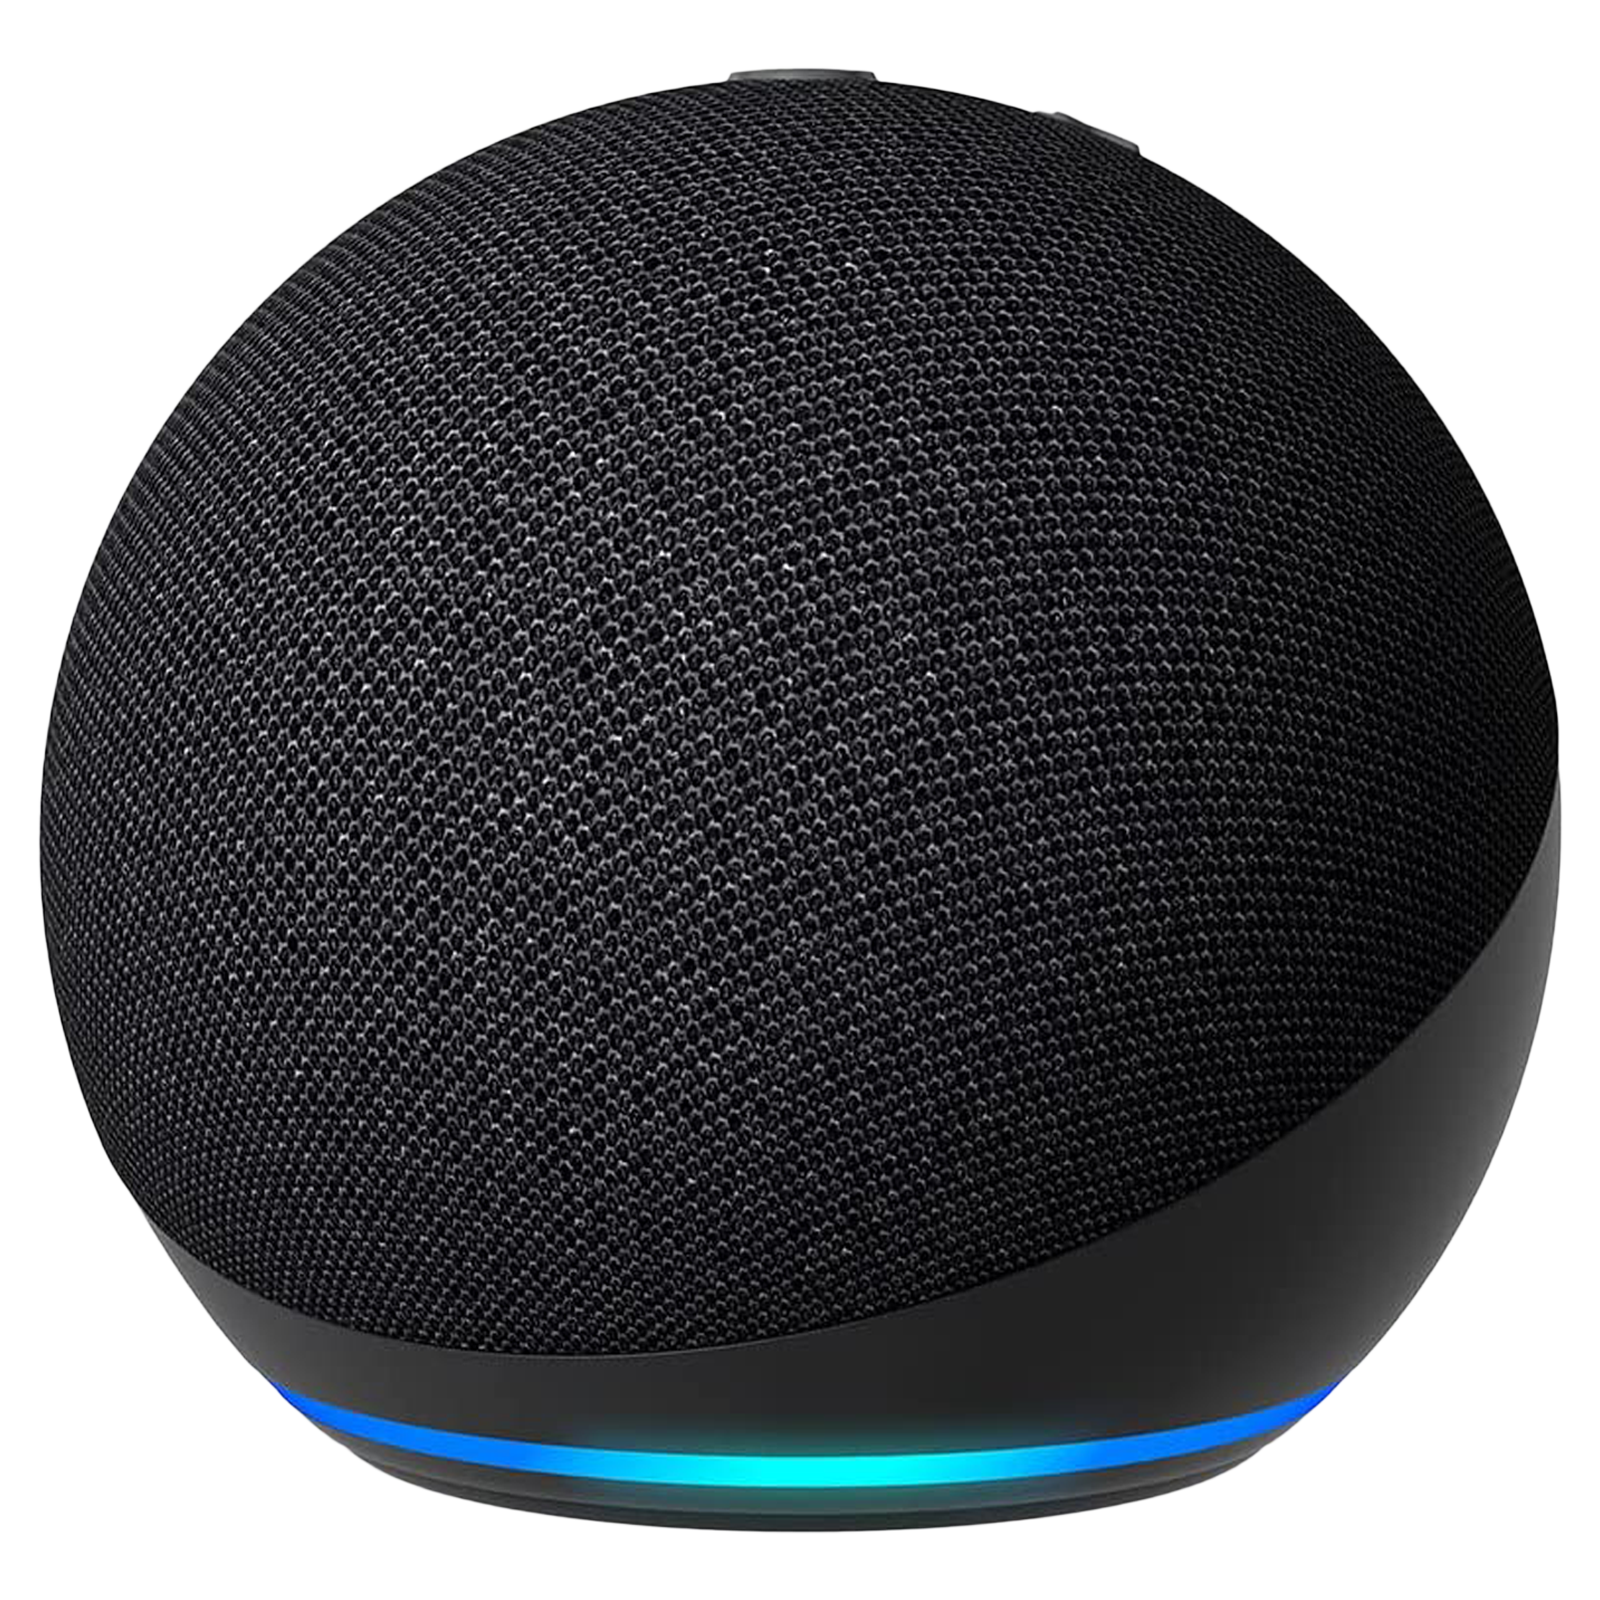 Echo Dot (5th Gen): still small, but now mightier than ever